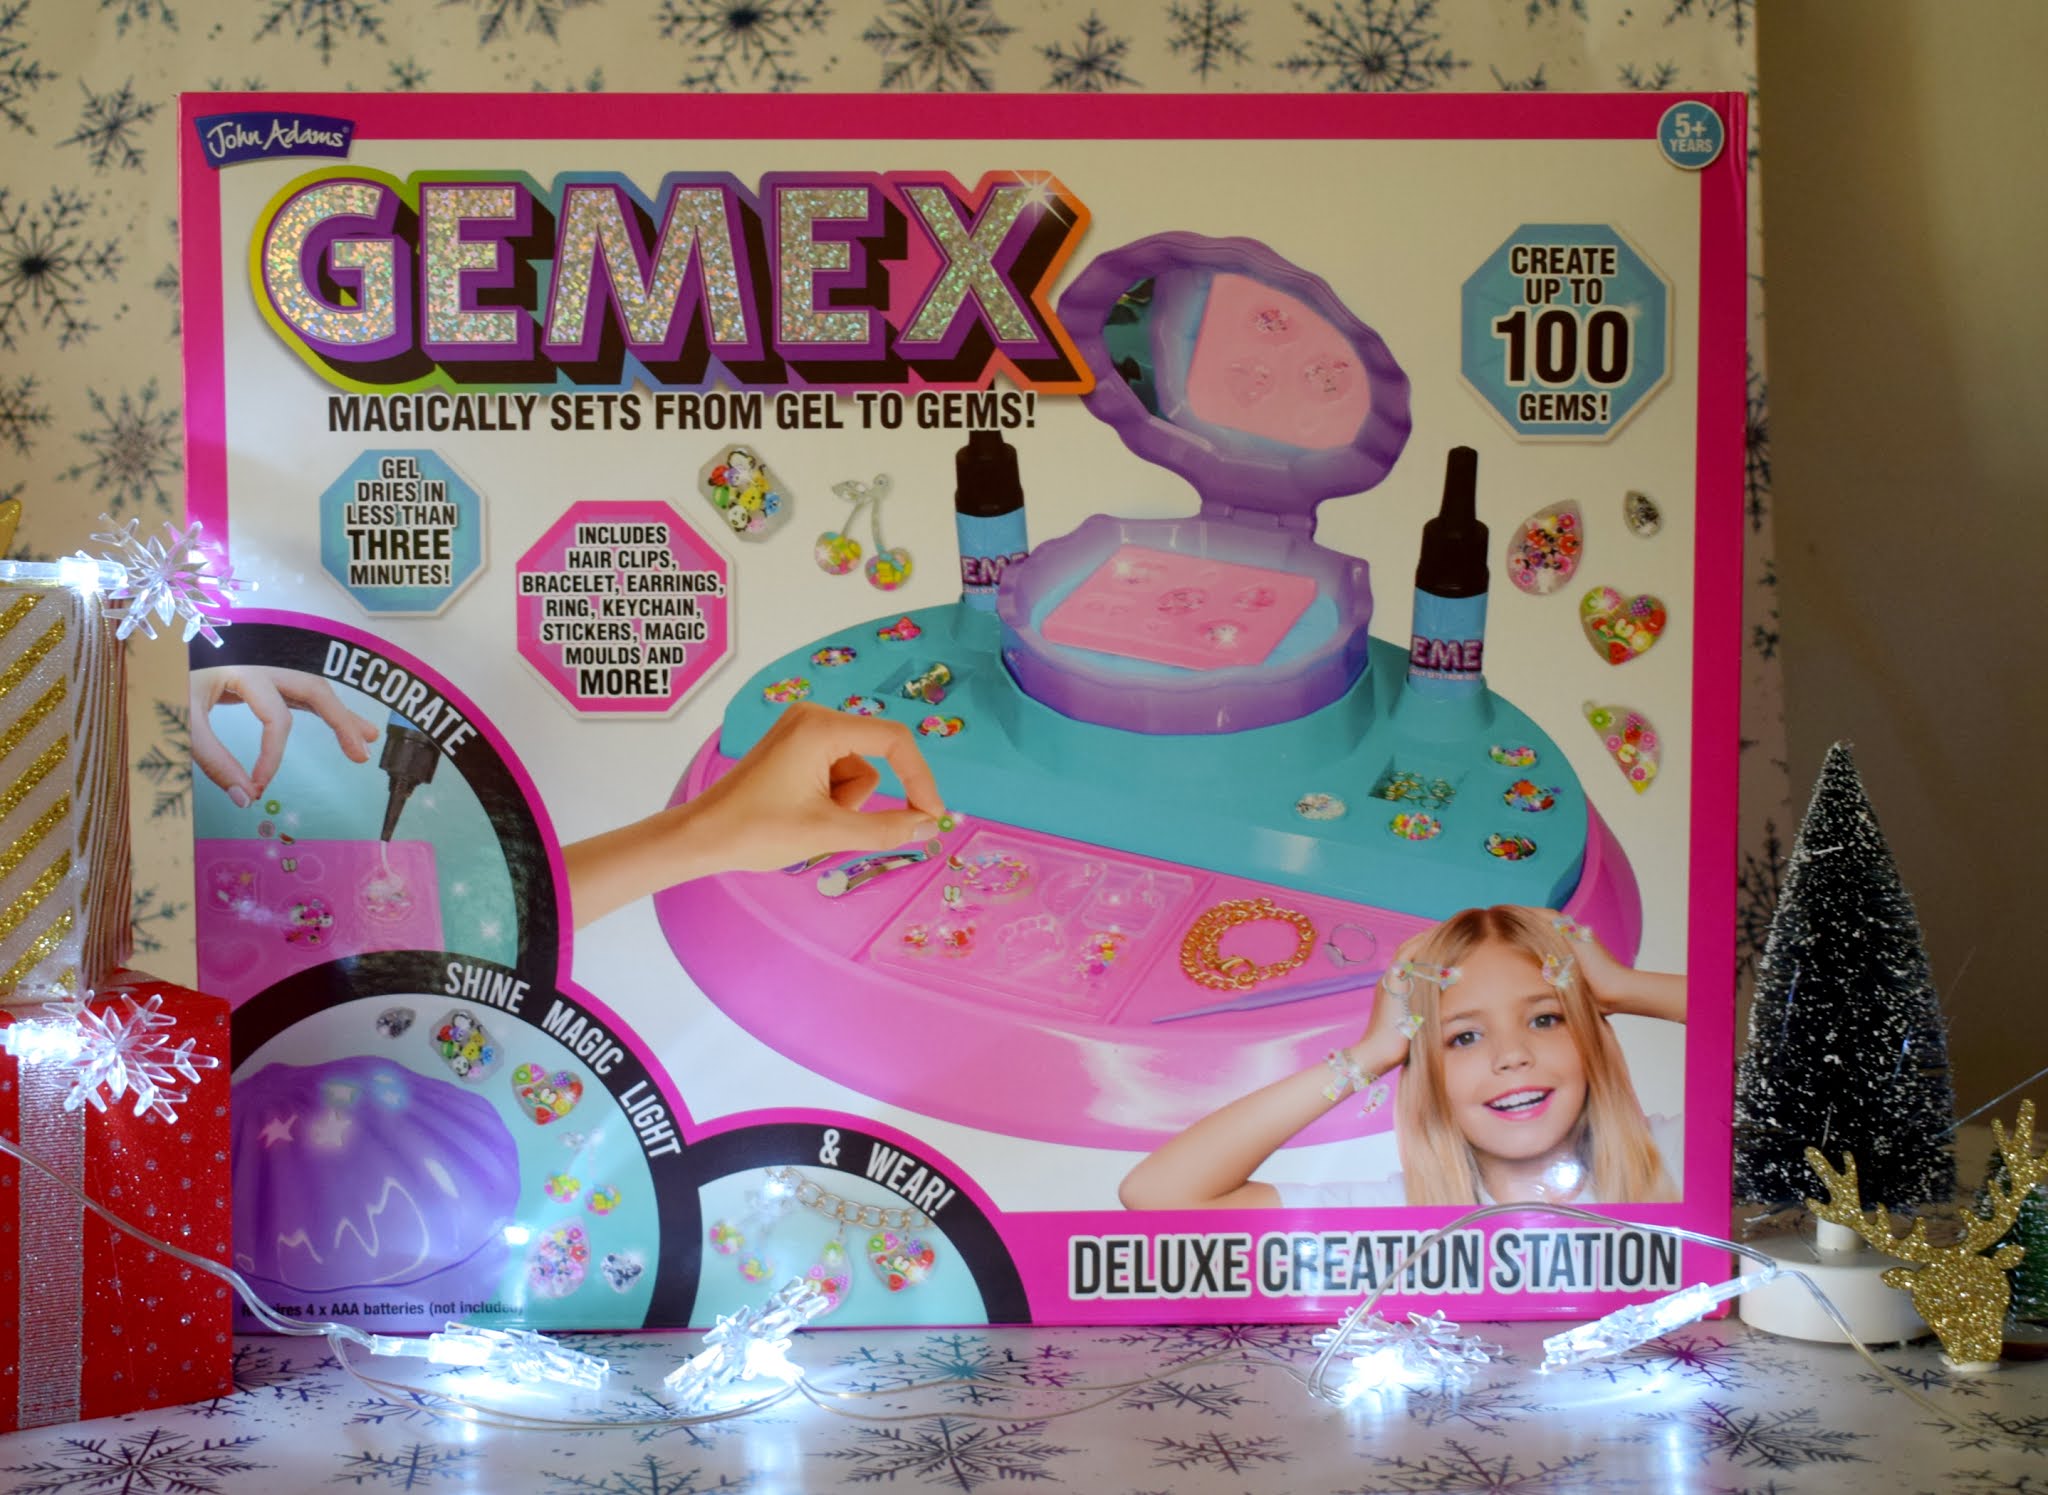 GEMEX Unboxing, Magic Shell Playset, Magically sets from gel to gems